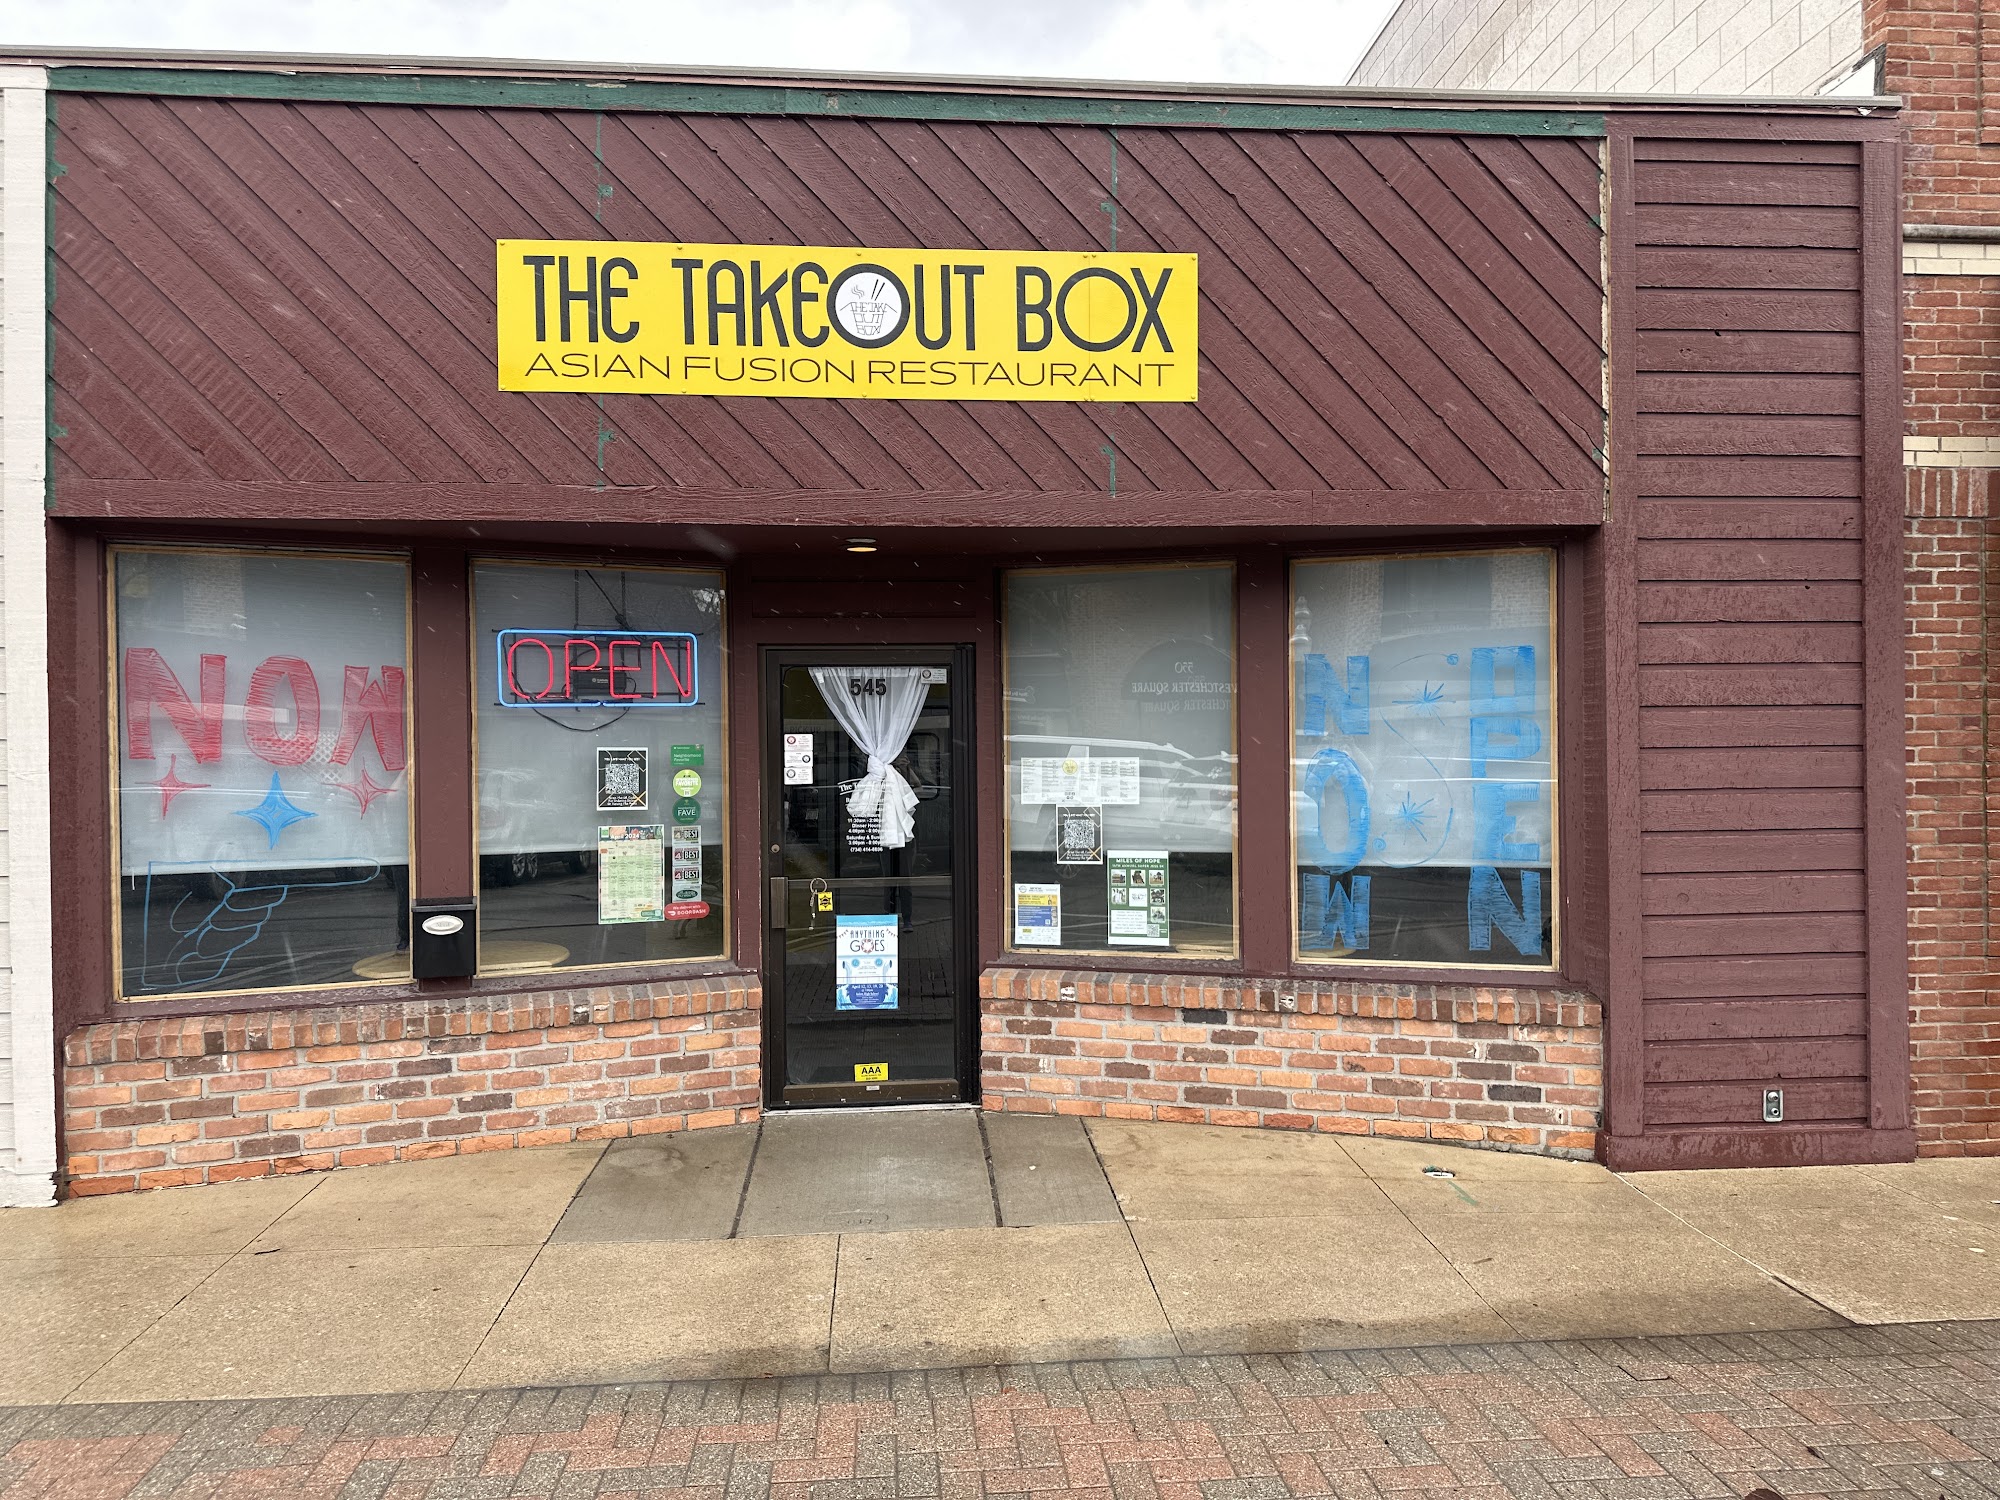 The Takeout Box Plymouth 545 Forest Ave, Plymouth, MI 48170